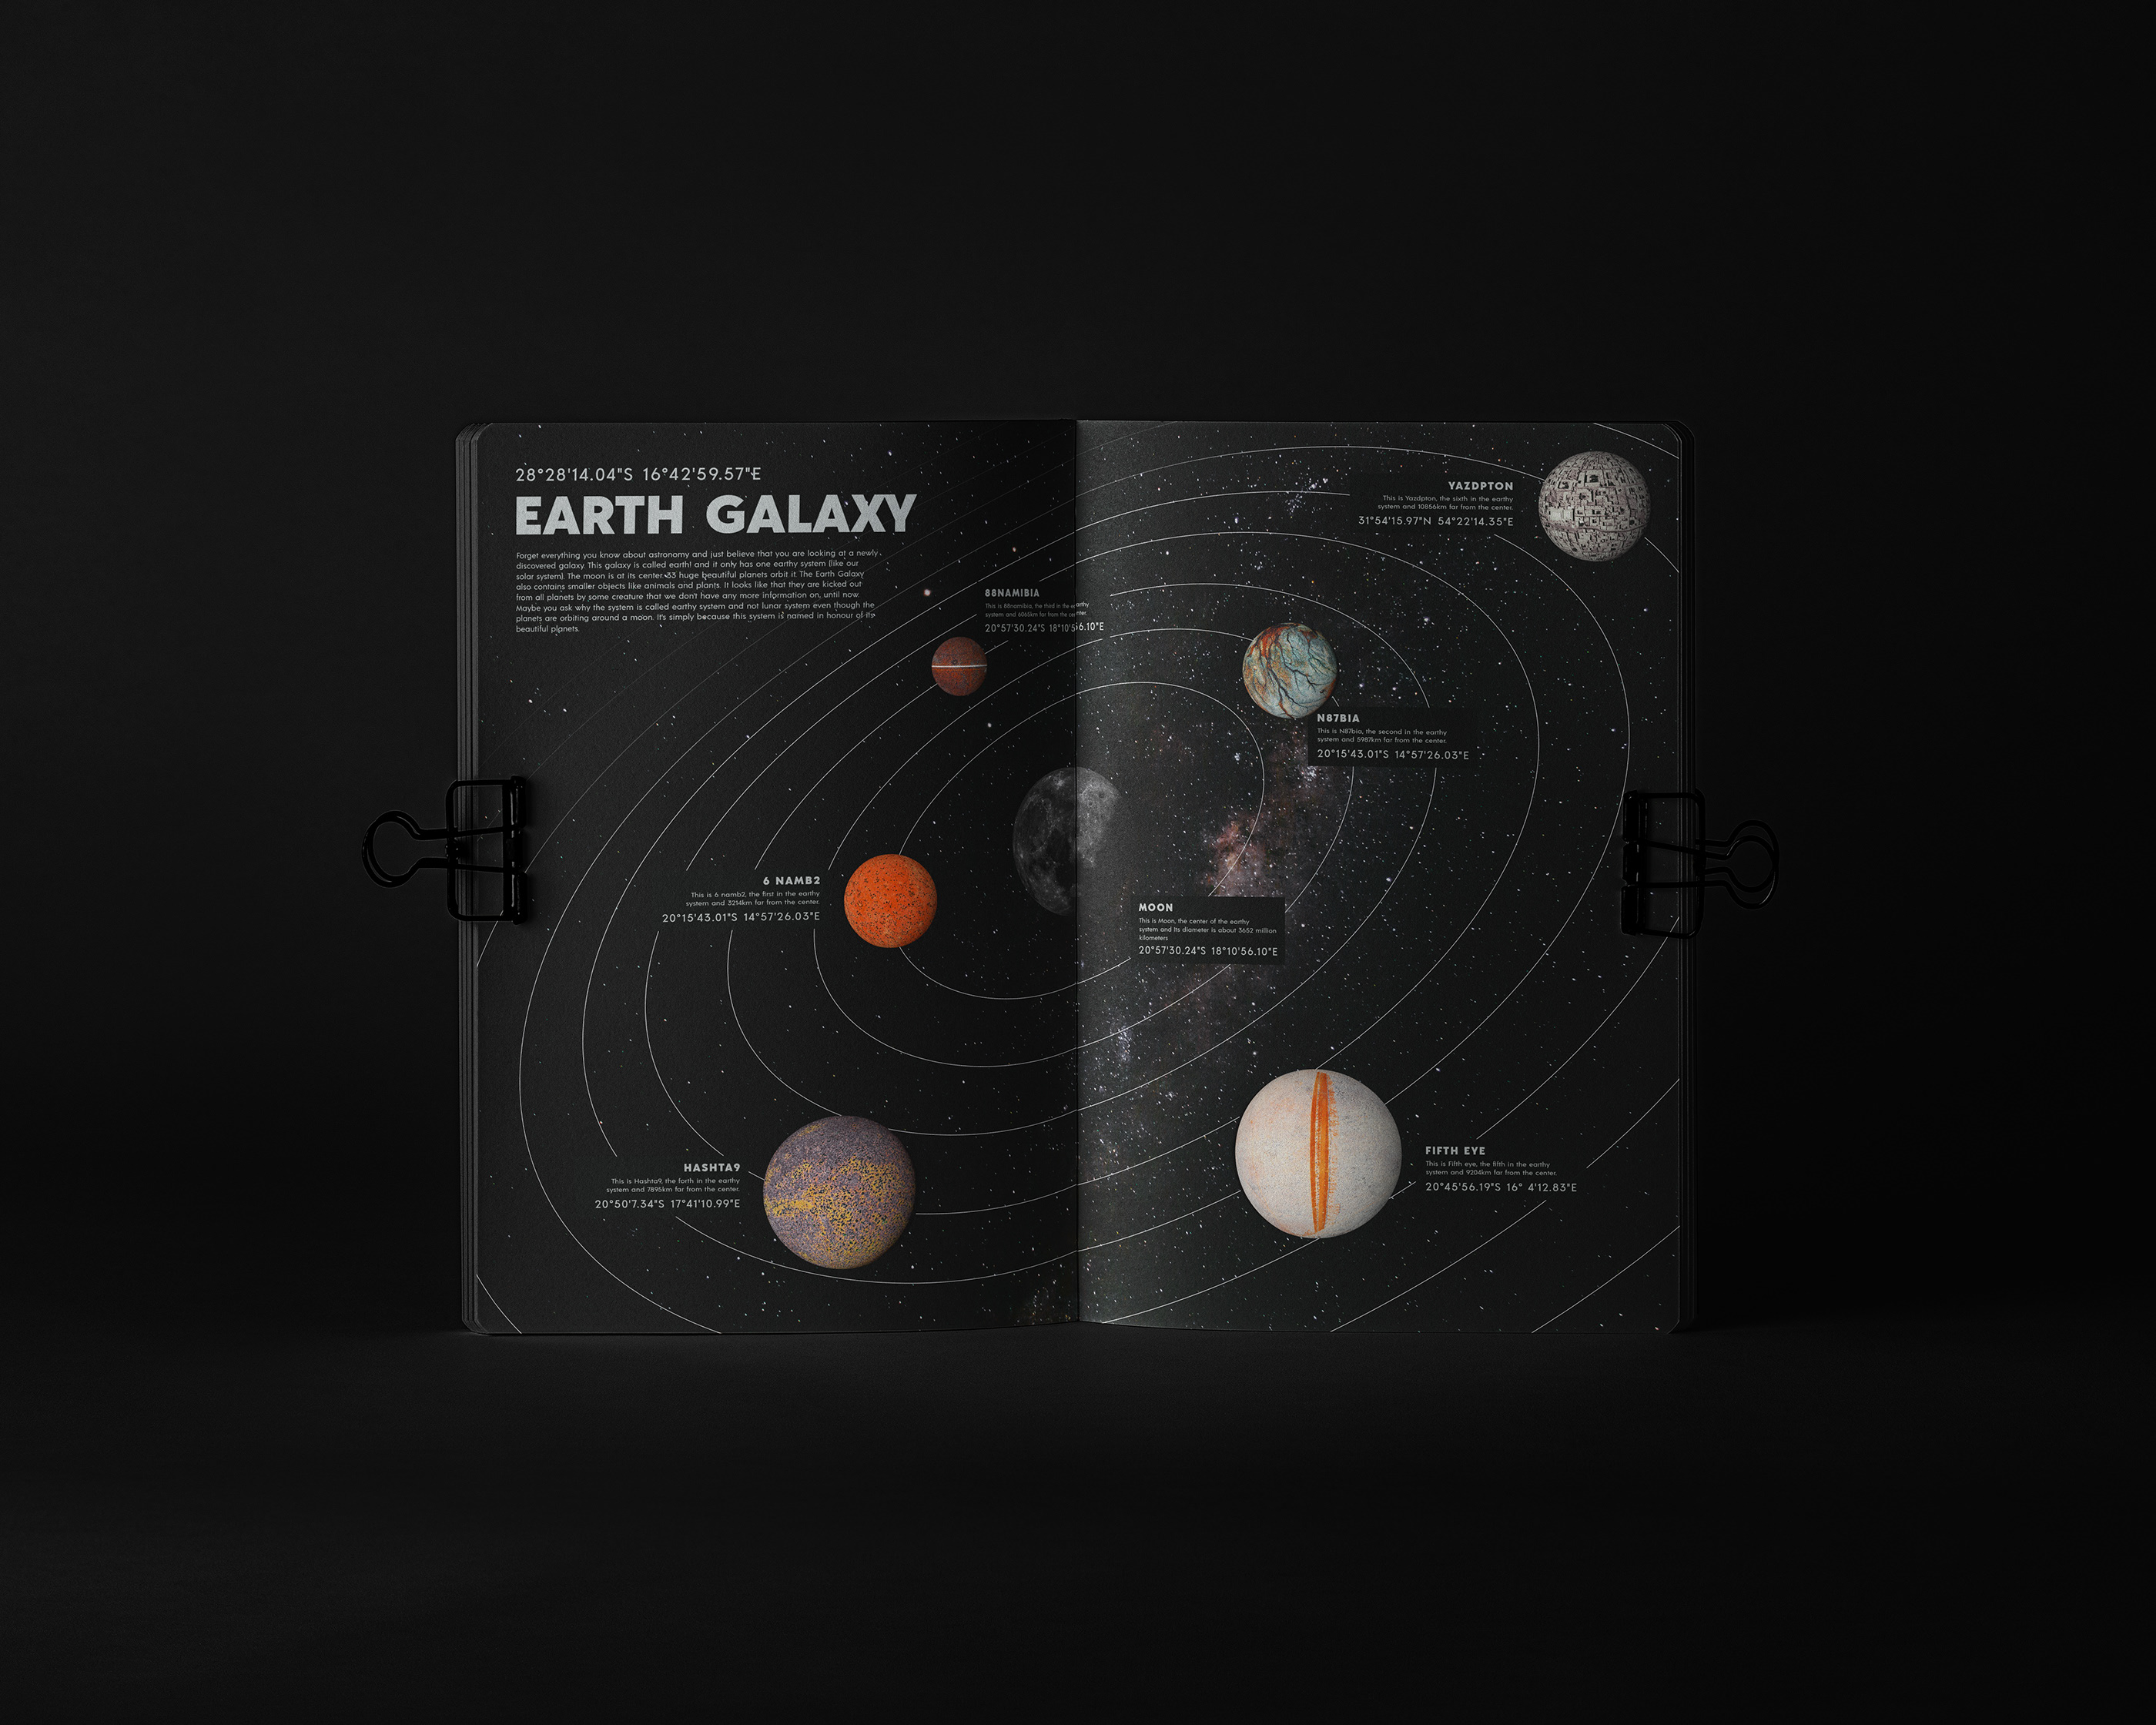 Earth Galaxy :: We made some new planets! on Behance27fcd692139559.5e43bce99c4f3.jpg